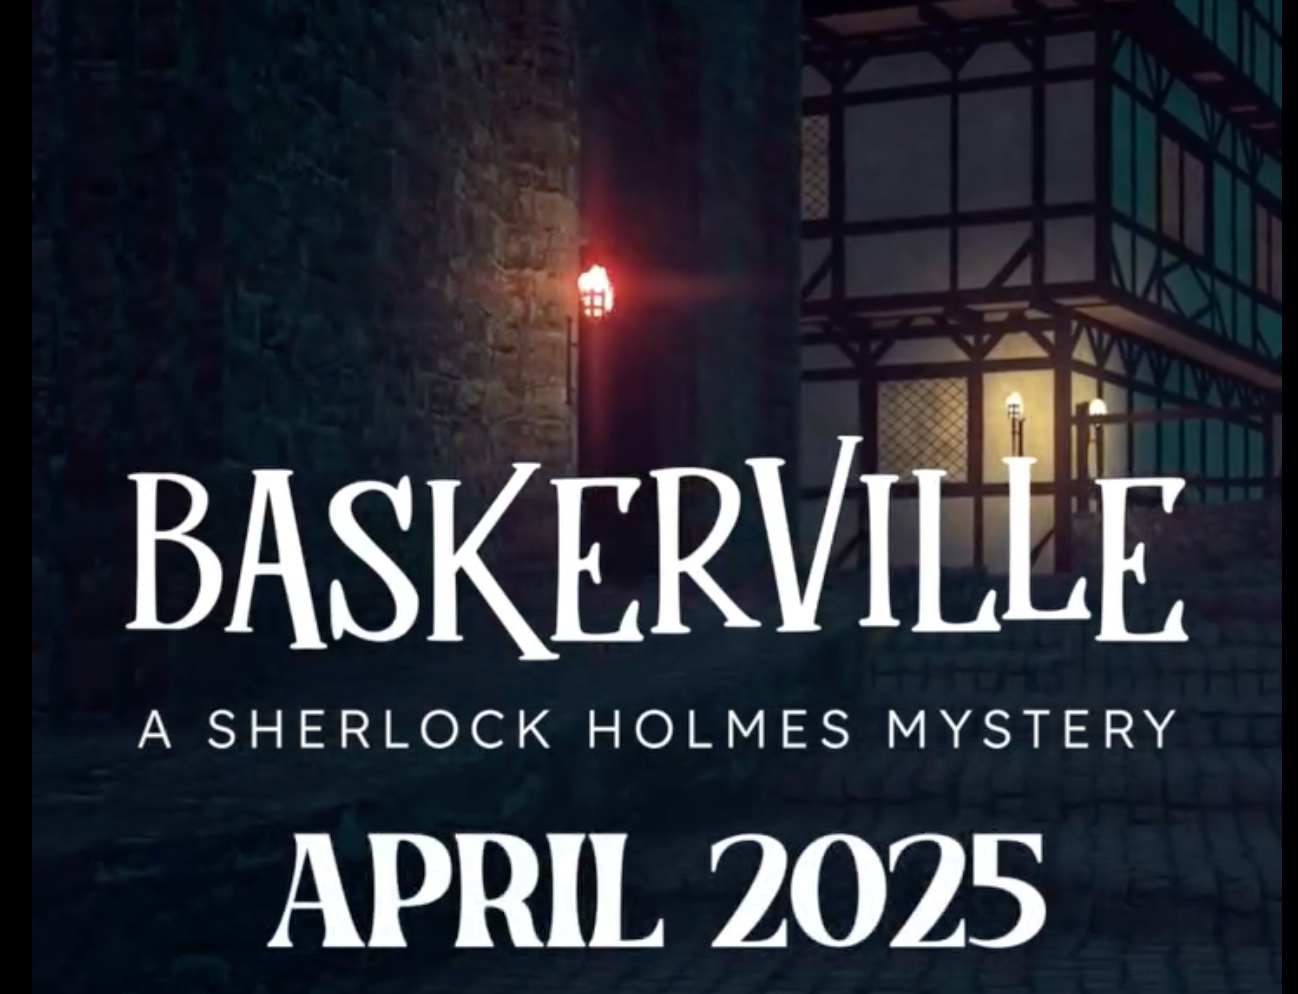 Baskerville by Angelo Civic Theatre